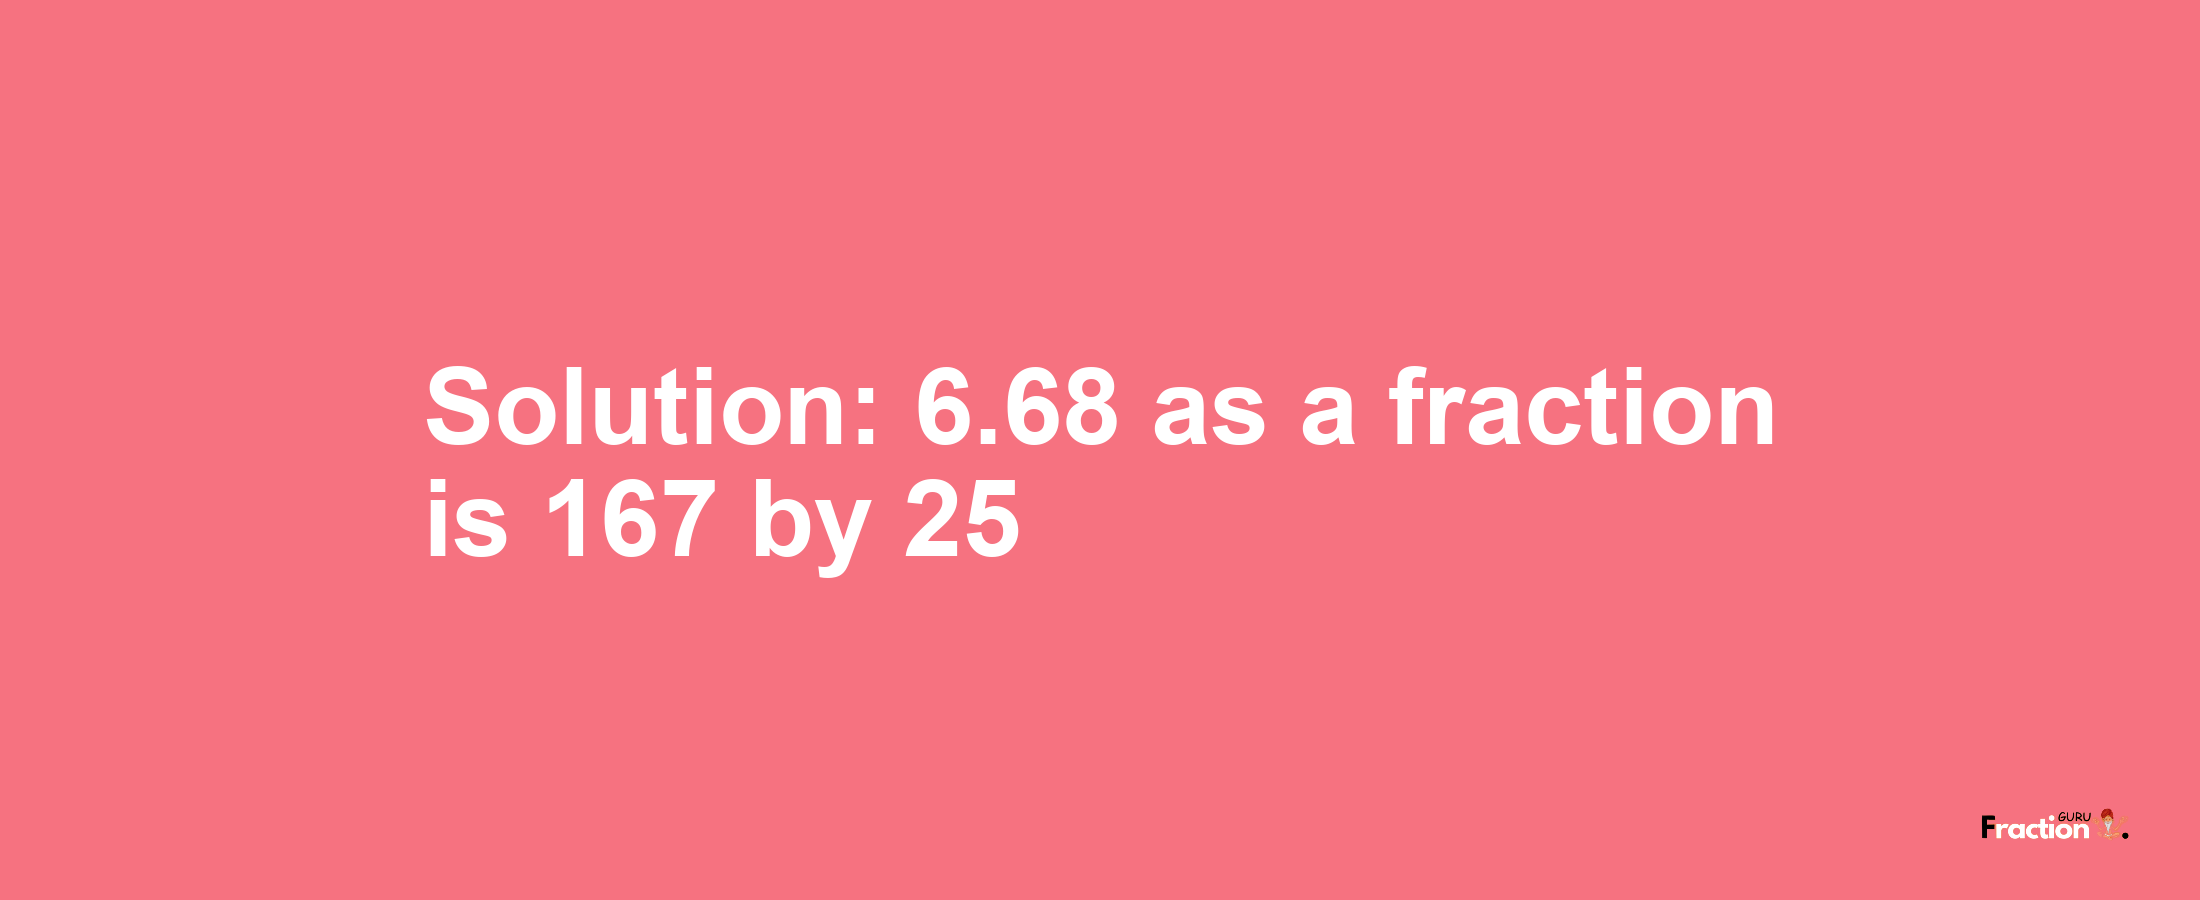 Solution:6.68 as a fraction is 167/25